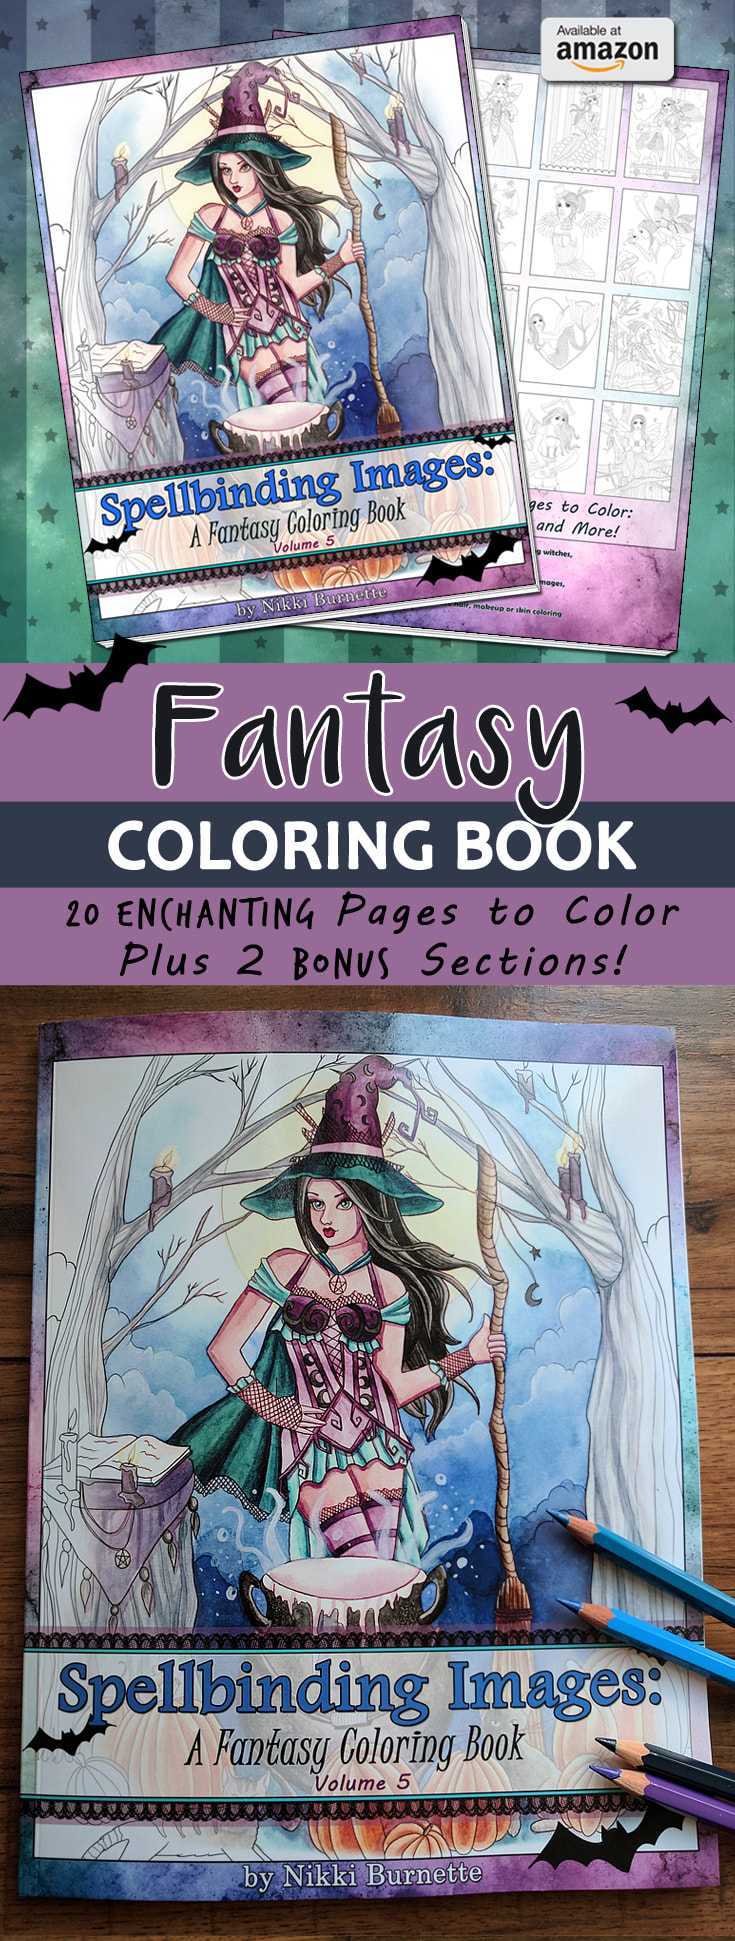 Color your way through a world of fantasy, fairies, mermaids and more! This coloring book incoludes 20 black and white illustrations featuring fairies, mermaids, witches and more. Adult coloring is a fun and relaxing activity for everyone to enjoy. Includes 2 bonus sections: Design Pages and Bonus Illustrations!